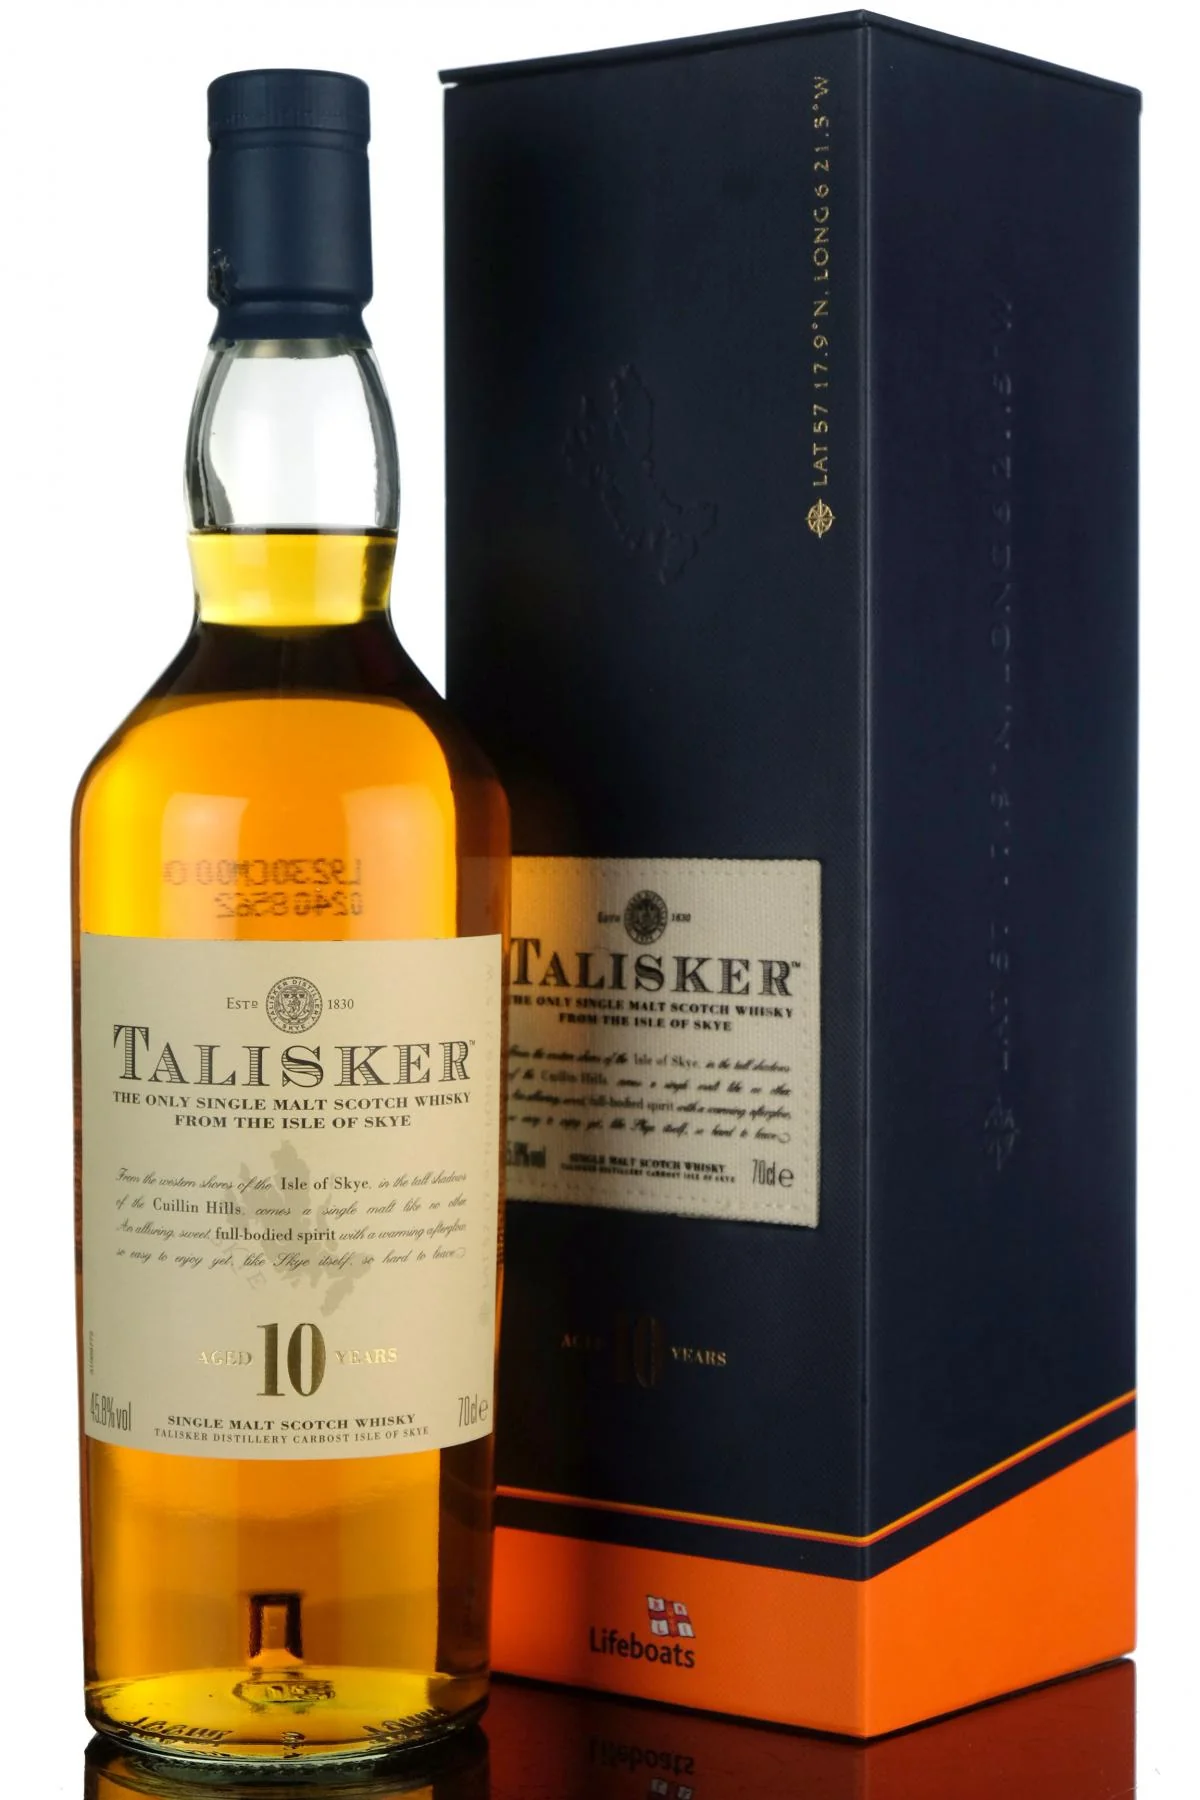 Talisker 10 Year Old - RNLI Lifeboats